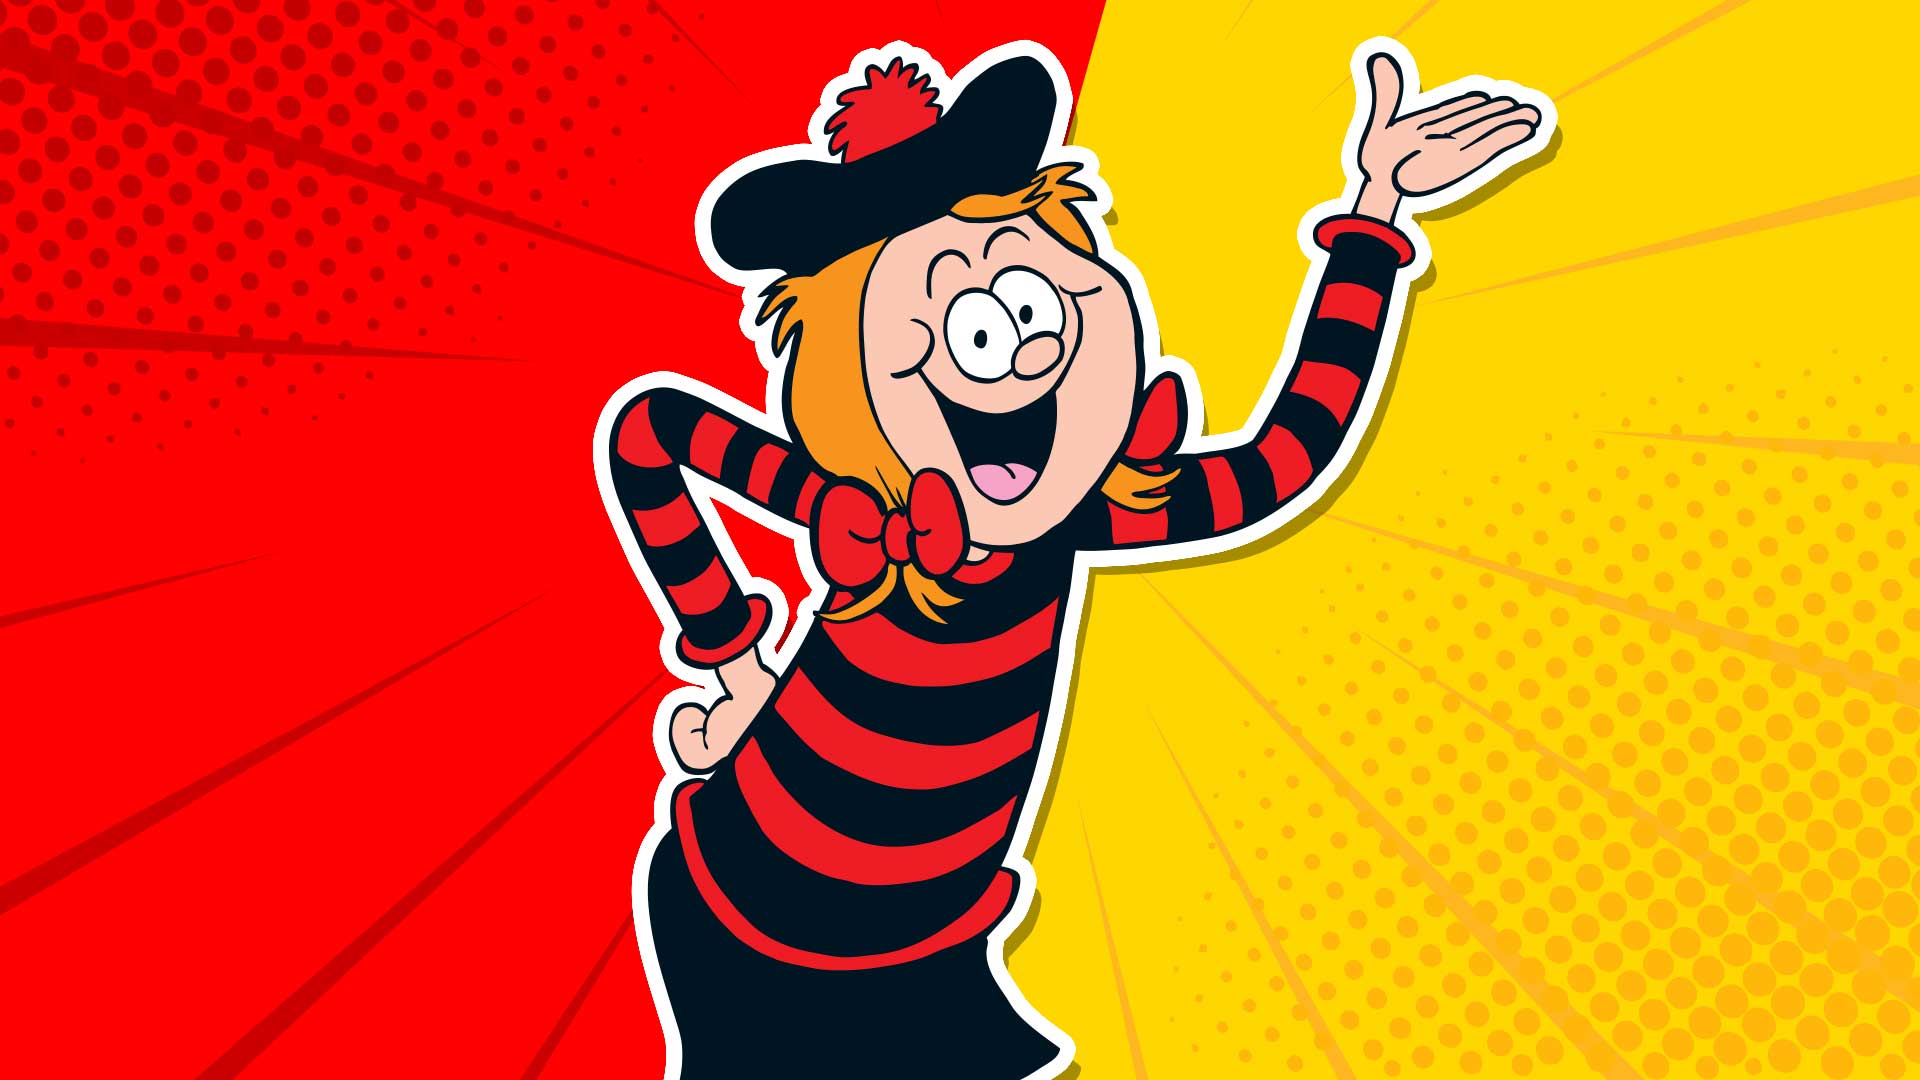 Minnie on a red and yellow background